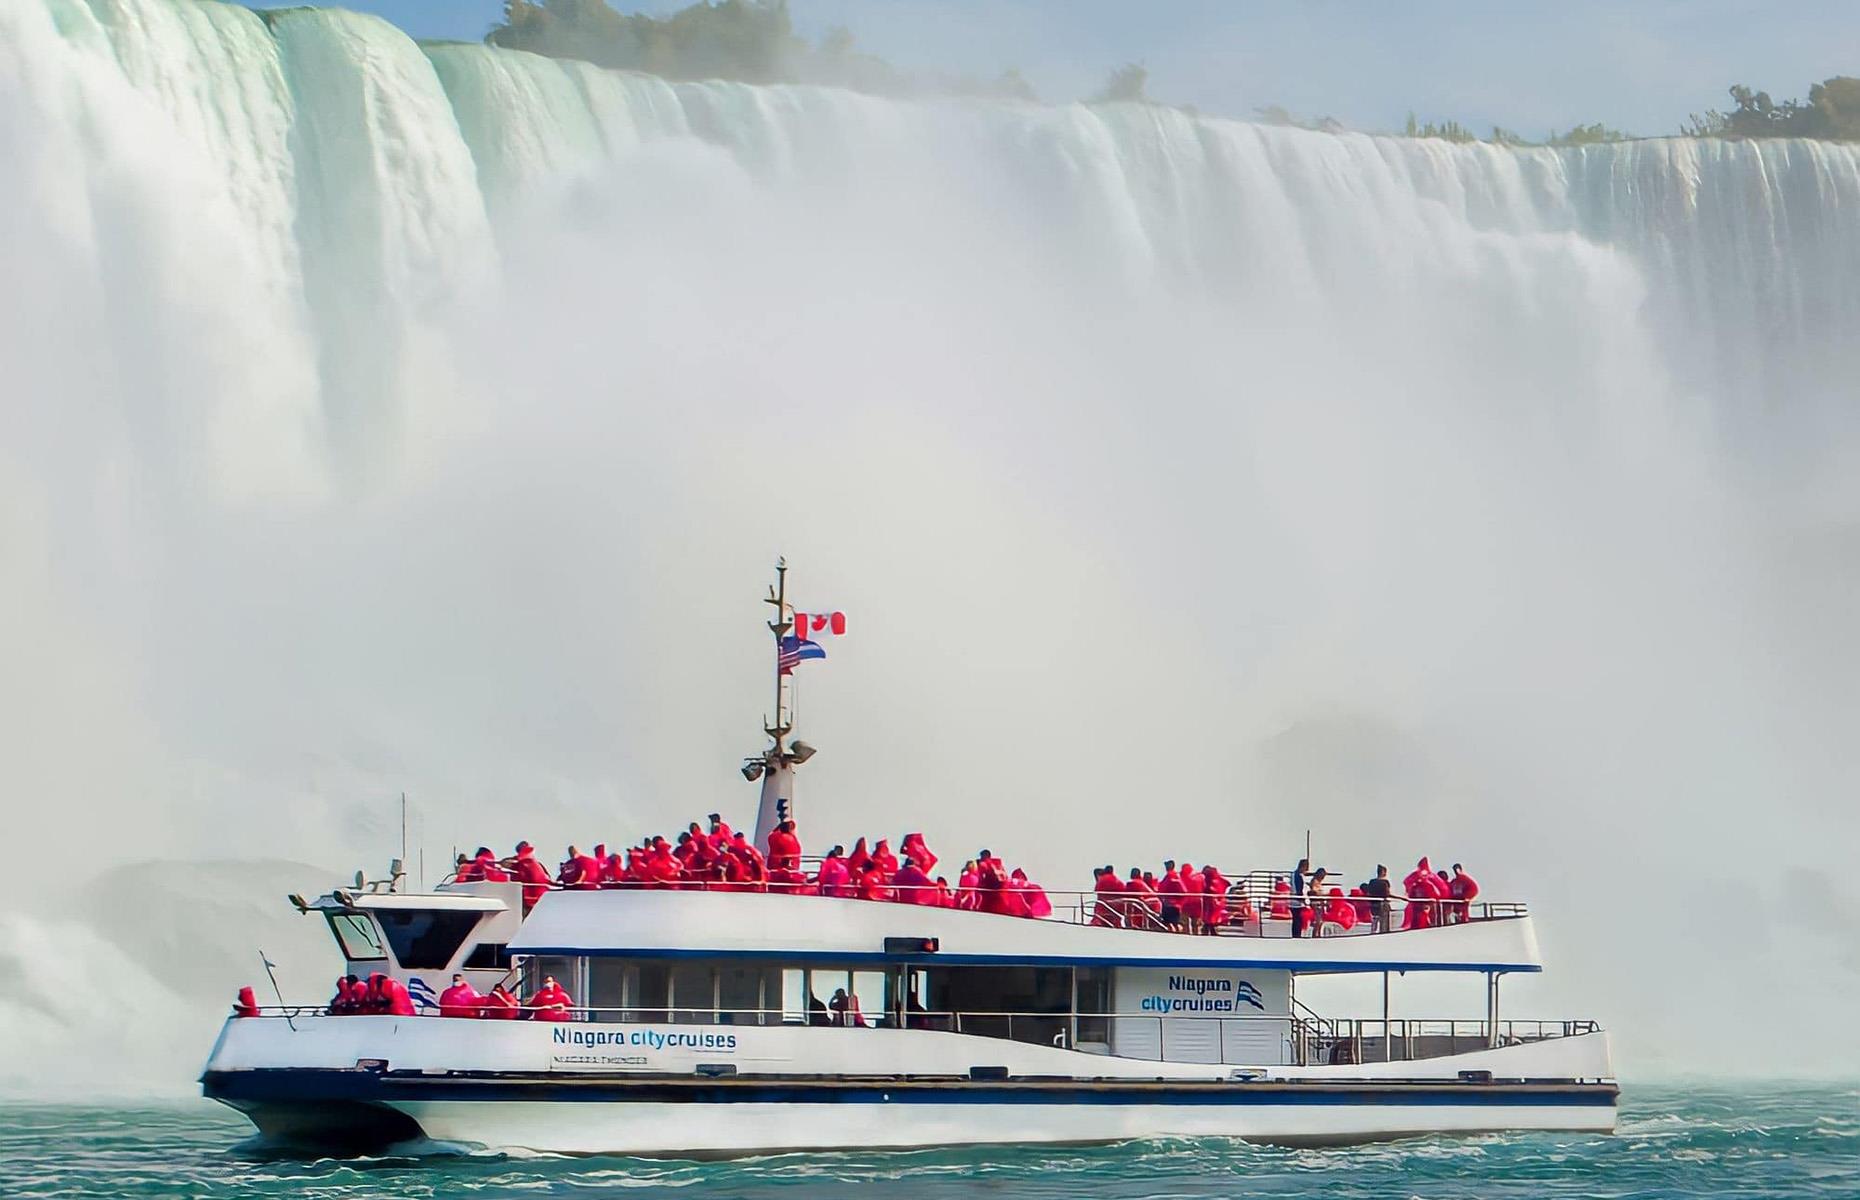 <p>Get up close and personal with the falls on board a boat tour by <a href="https://www.niagaraparks.com/visit/attractions/hornblower-niagara-cruises/">Niagara City Cruises</a>. Yet another journey of a lifetime, this 20-minute cruise allows you to enjoy amazing views of the Niagara Gorge, American and Bridal Veil Falls, before coming face-to-face with Horseshoe Falls.</p>  <p>You’re given a complimentary poncho, which you absolutely need if you’re at the front, then you can sit back (or stand) and let the audio commentary tell you all about this incredible natural marvel. </p>